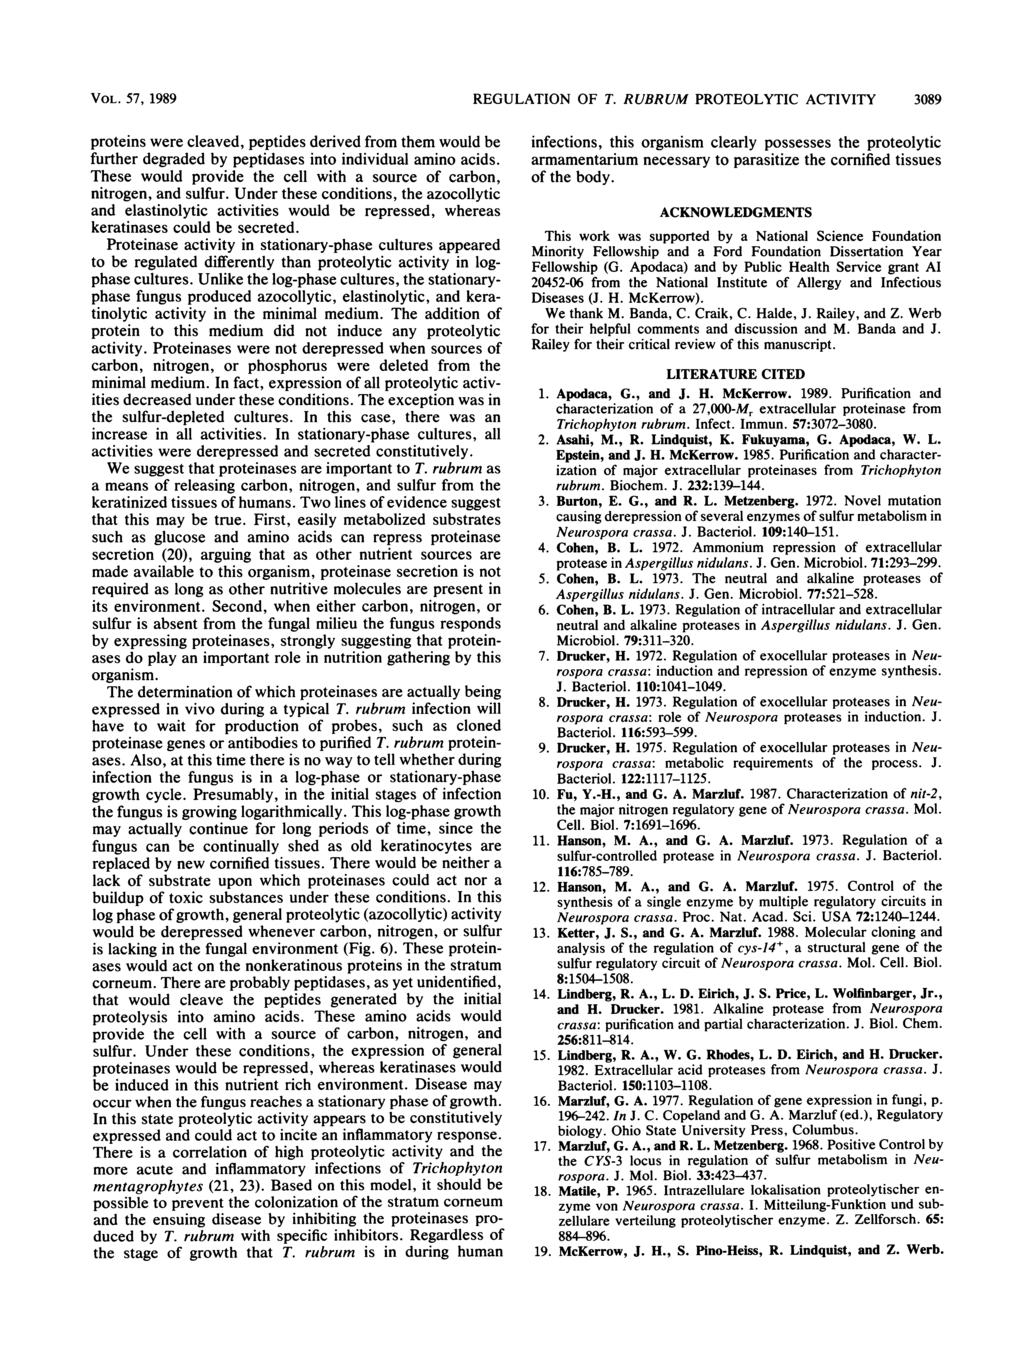 VOL. 57, 1989 REGULATION OF T. RUBRUM PROTEOLYTIC ACTIVITY 3089 proteins were cleaved, peptides derived from them would be further degraded by peptidases into individual amino acids.